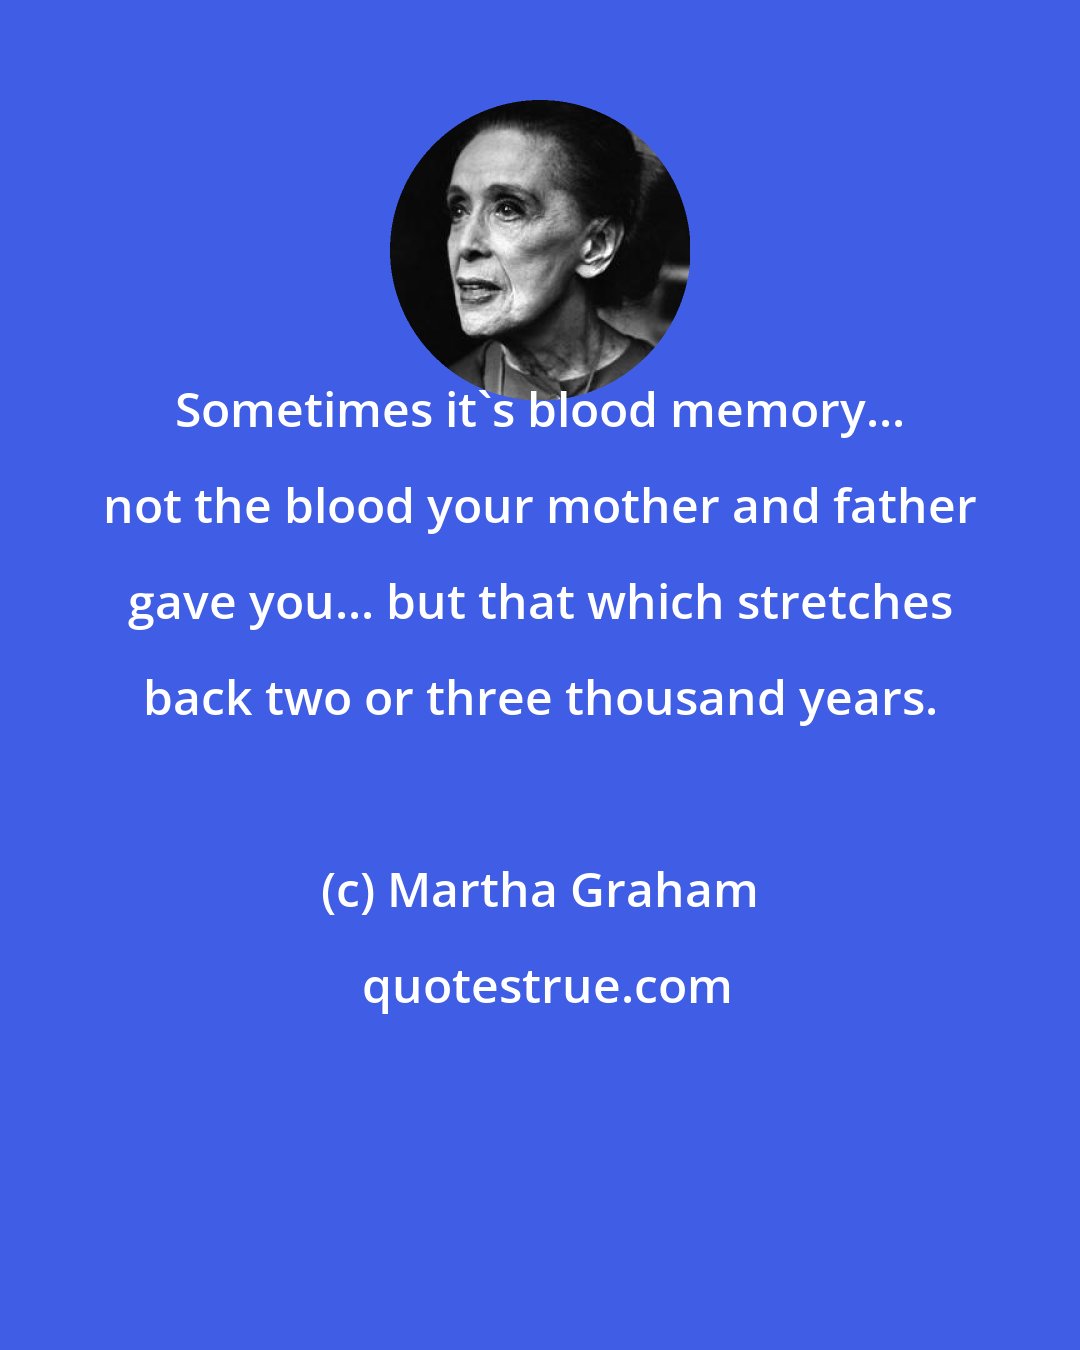 Martha Graham: Sometimes it's blood memory... not the blood your mother and father gave you... but that which stretches back two or three thousand years.